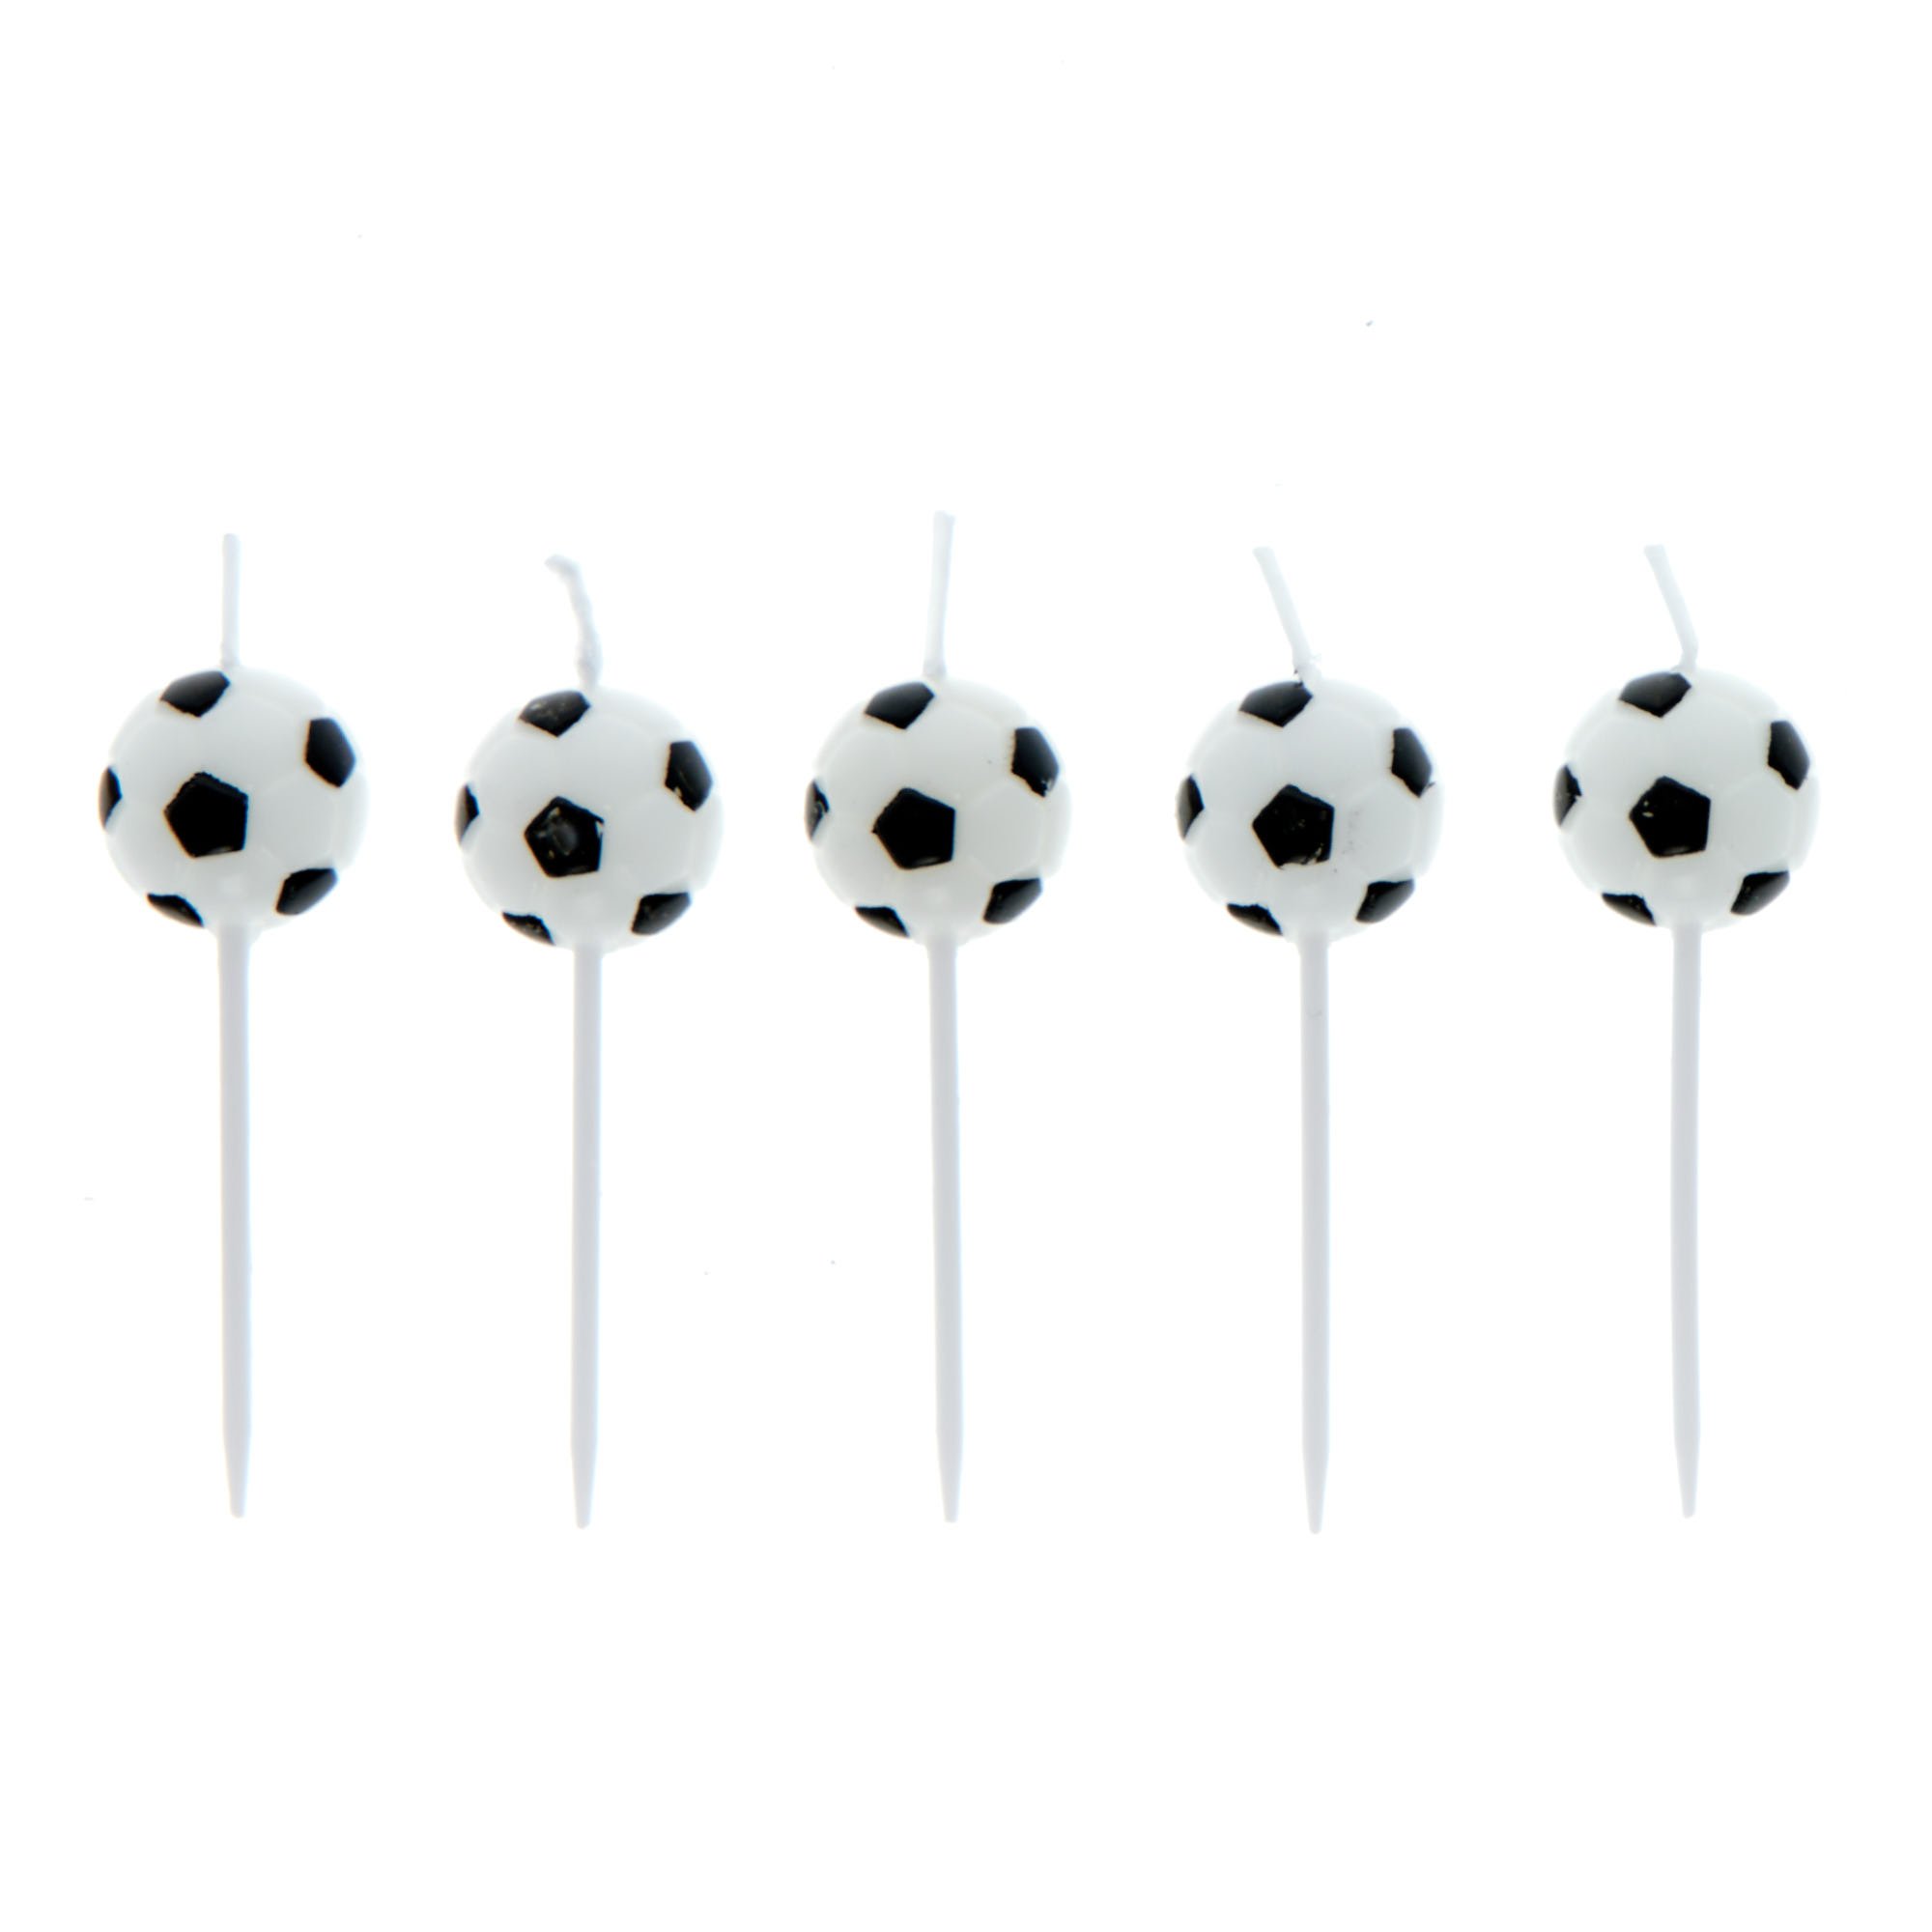 Football Pick Cake Candles - Pack of 5